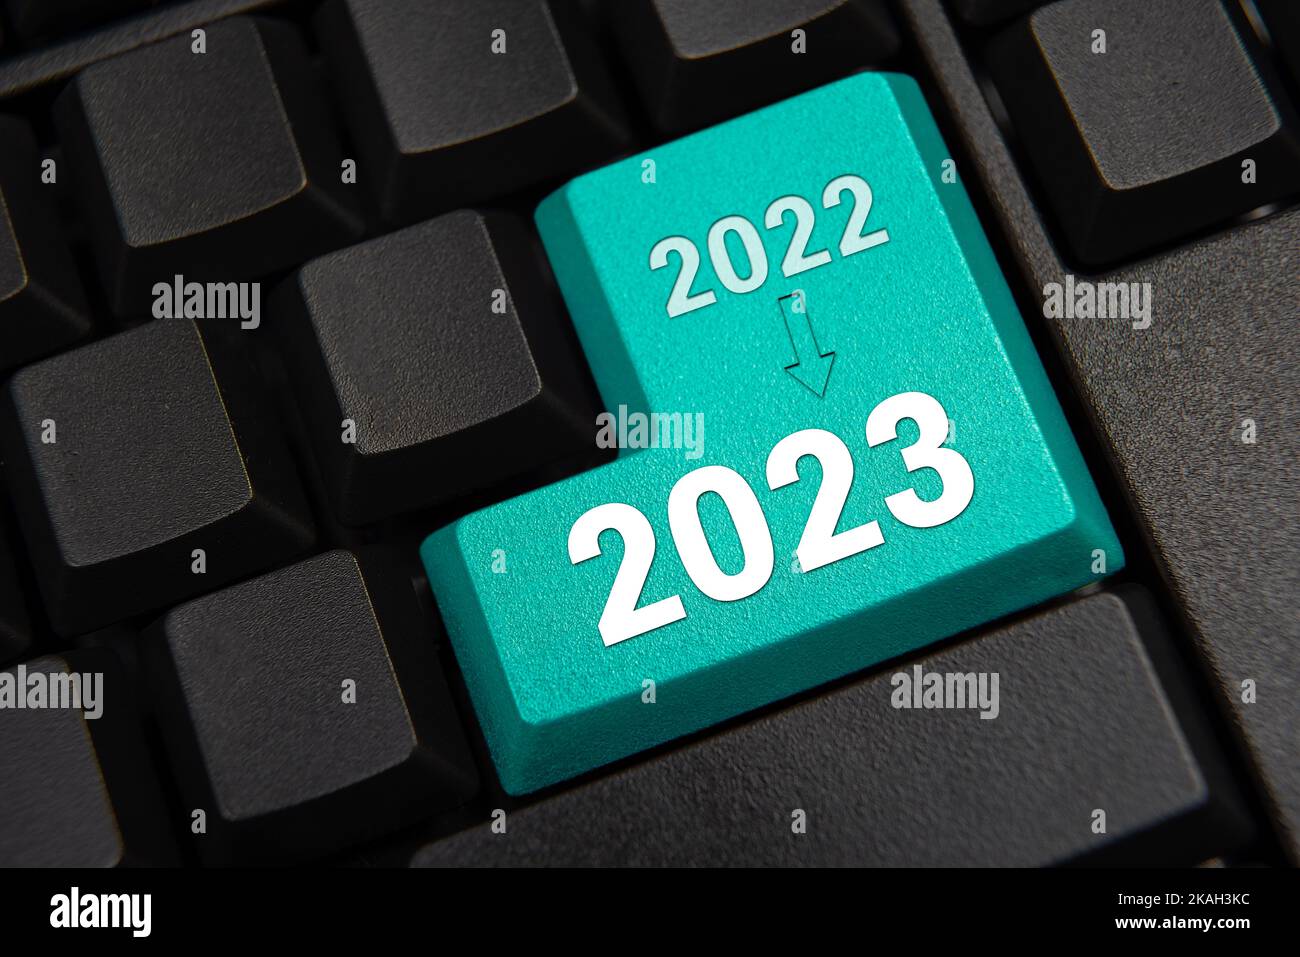 Enter 2023 on the keyboard. A concept changing from 2022 to 2023 Stock ...